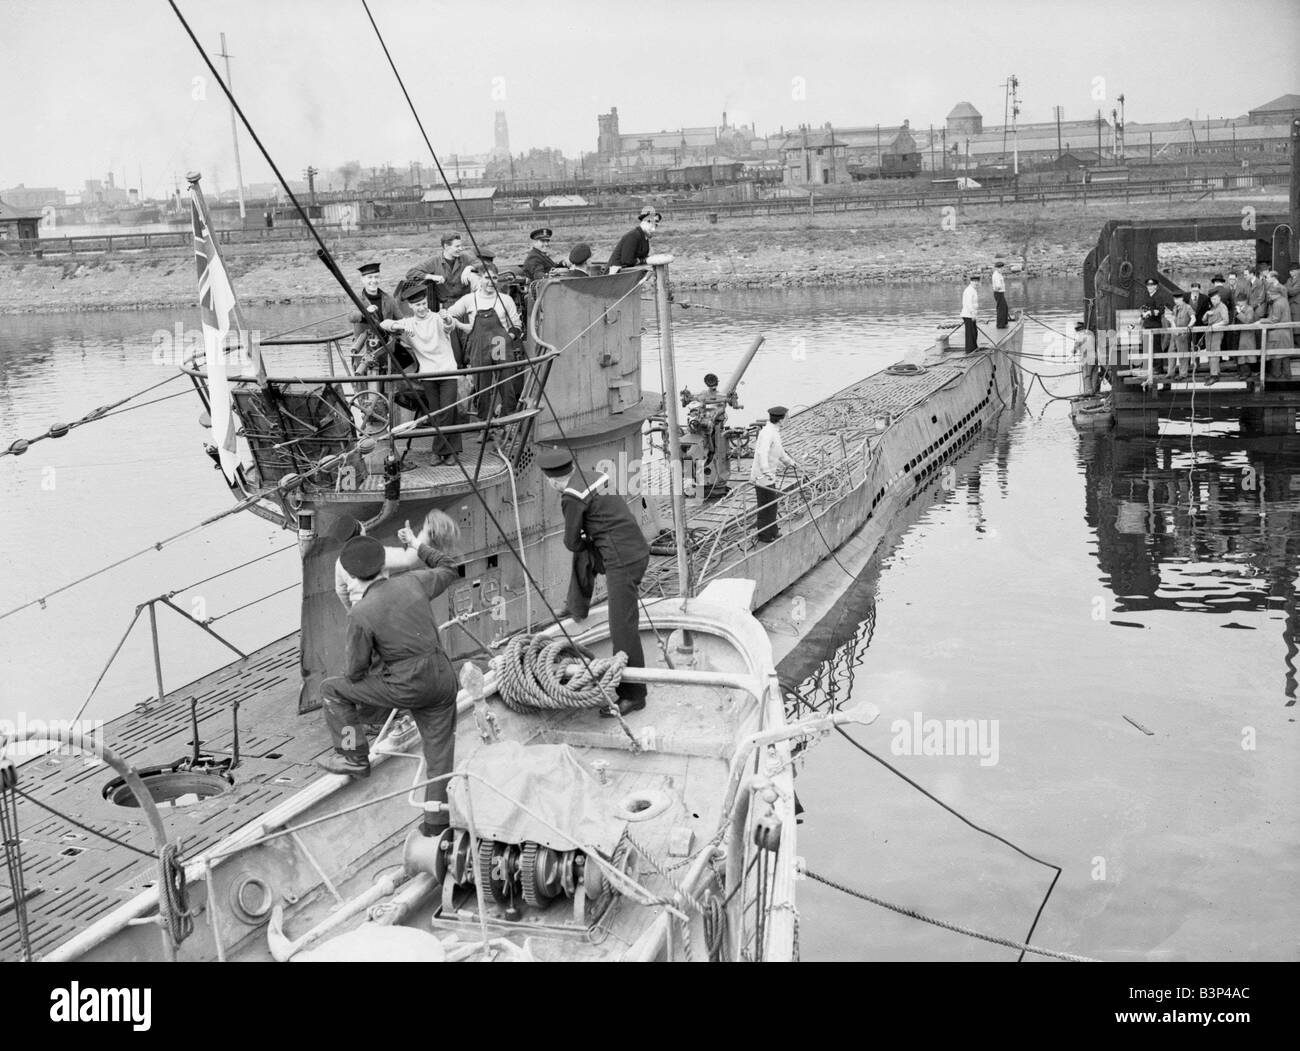 WW2 German U Boat Submarine First German U Boat to be captured intact is sailed into port with a Royal Navy crew on board The Submarine is met at the quayside with well done thumbs up gestures by other sailors Stock Photo